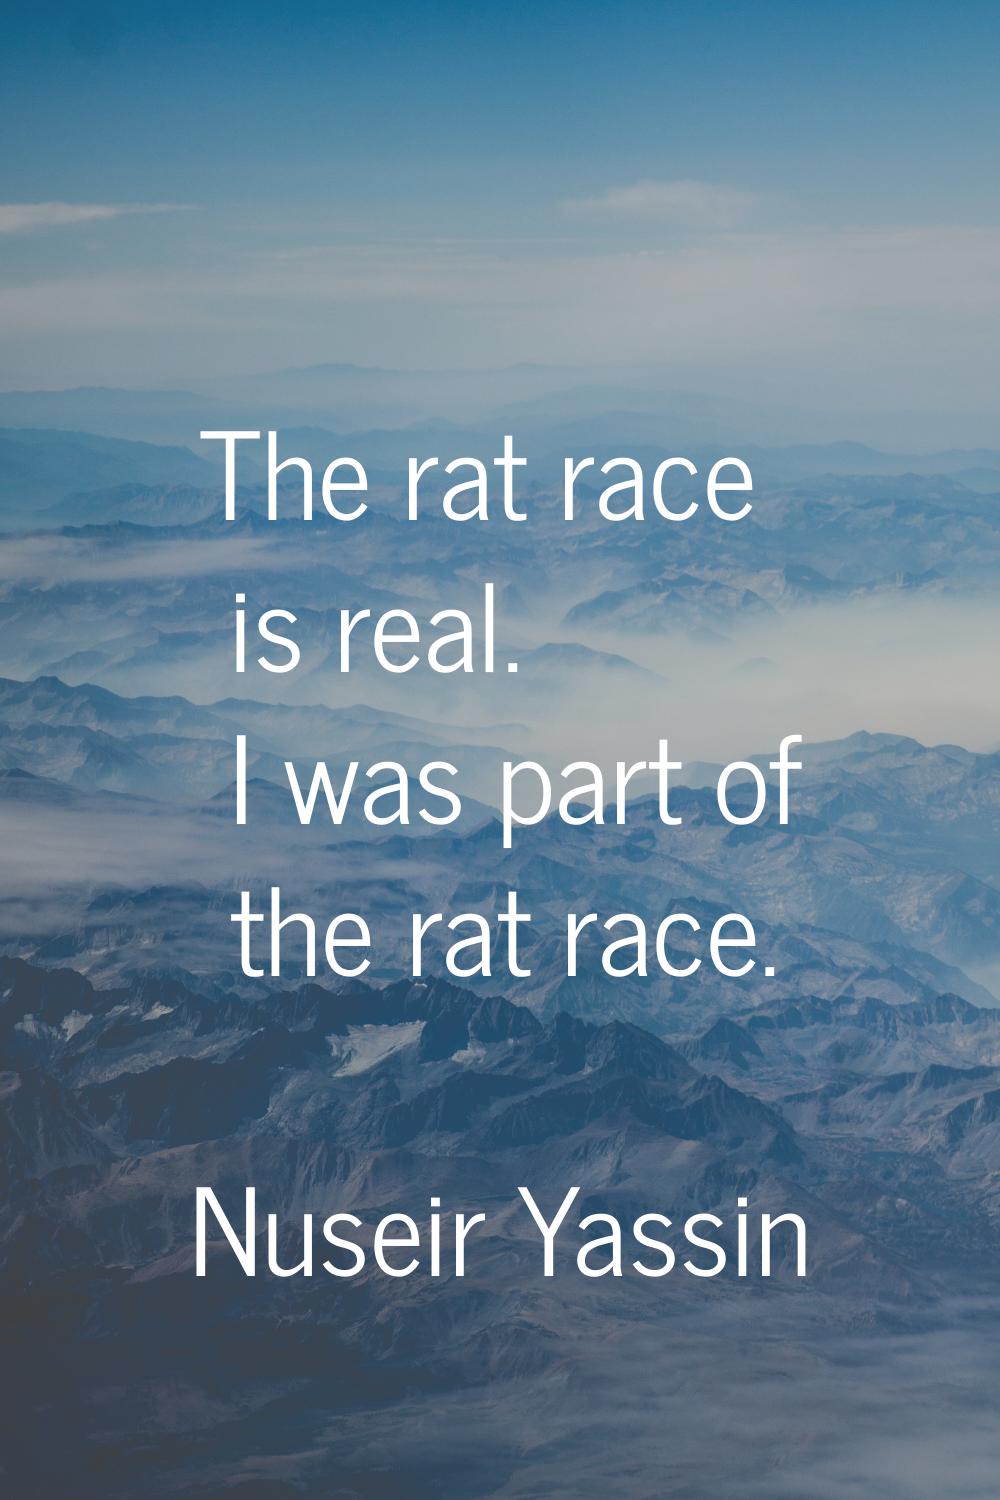 The rat race is real. I was part of the rat race.